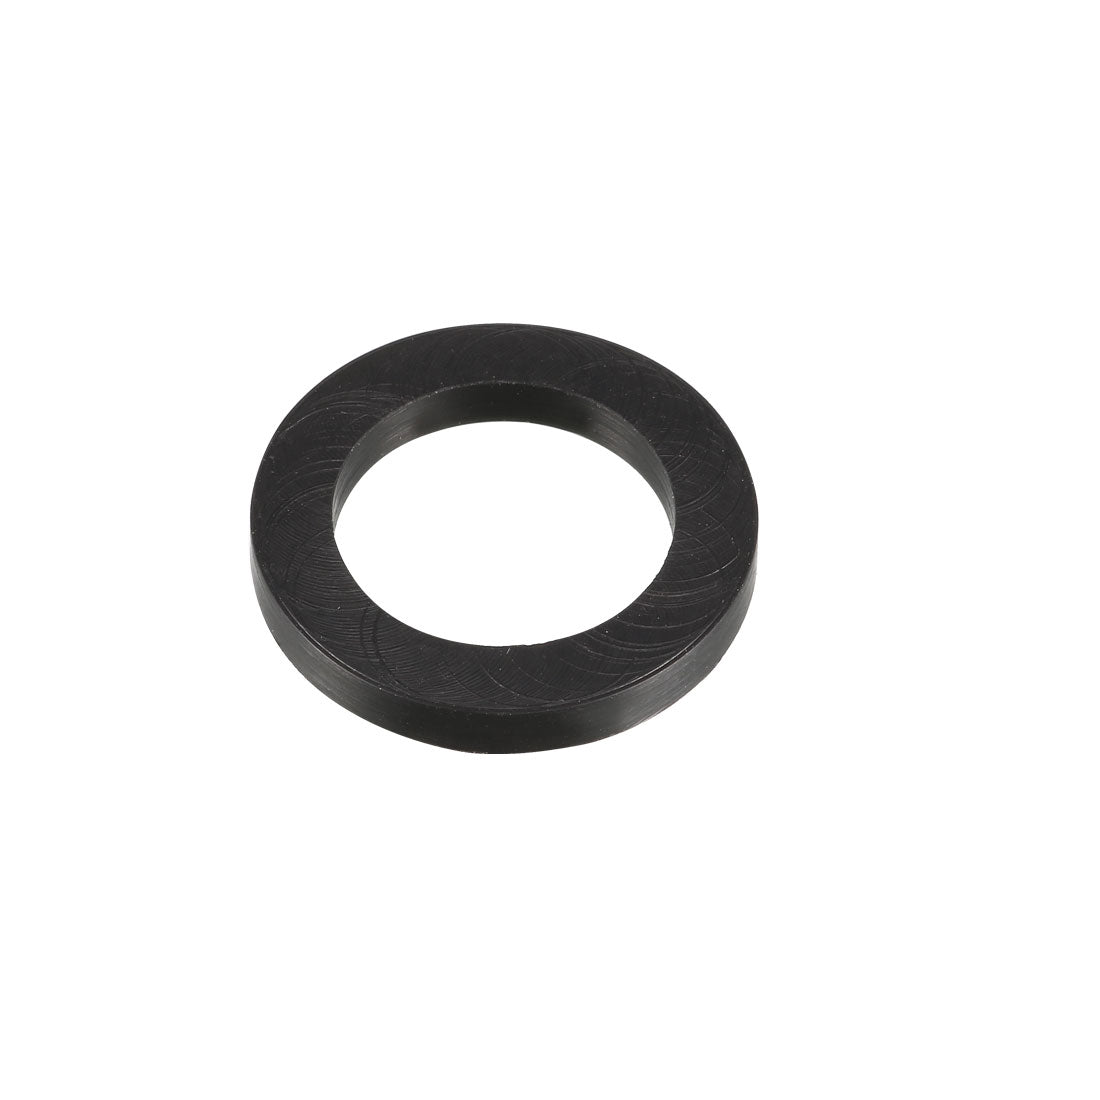 uxcell Uxcell Rubber Round Flat Washer Assortment Size Flat Washers, Black Pack of 20